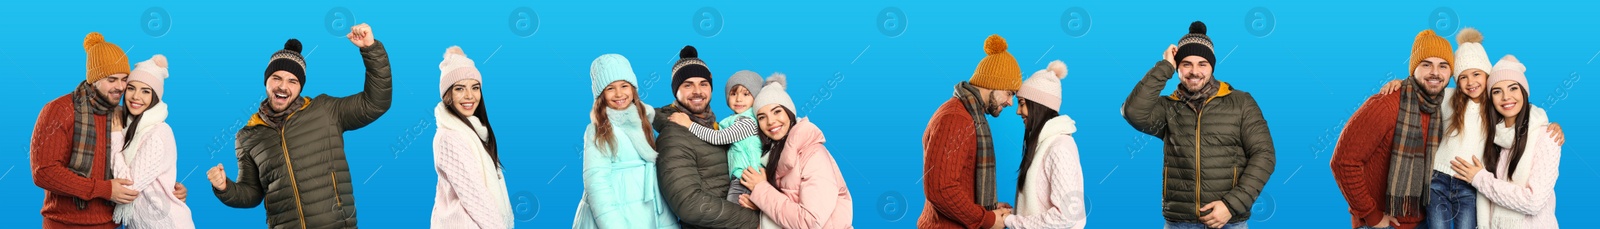 Image of Collage with photos of people wearing warm clothes on blue background, banner design. Winter vacation